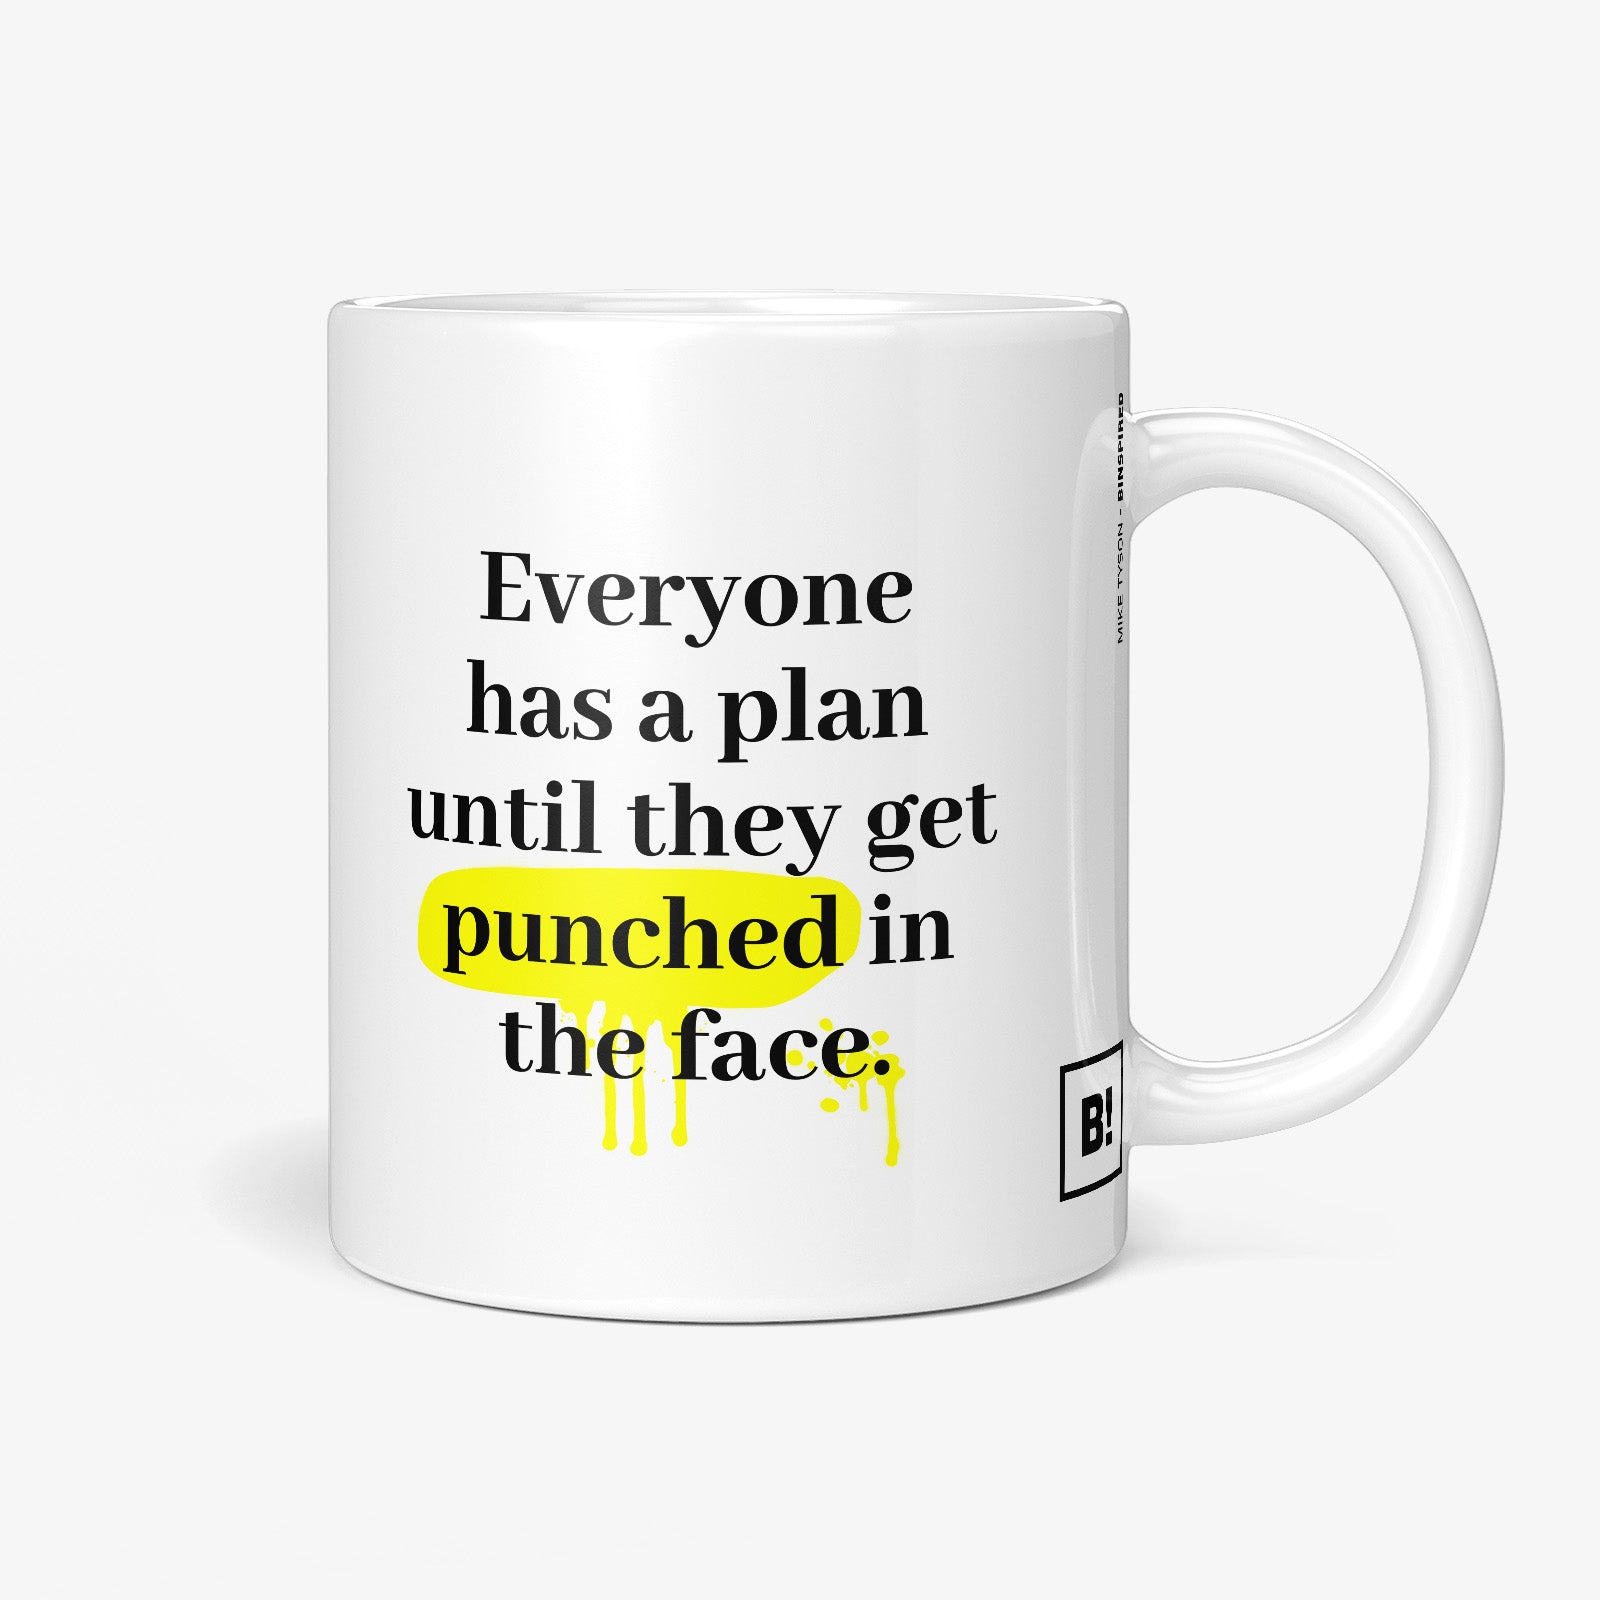 Be inspired by Mike Tyson's famous quote, "Everyone has a plan until they get punched in the face" on this white and glossy 11oz coffee mug with the handle on the right.